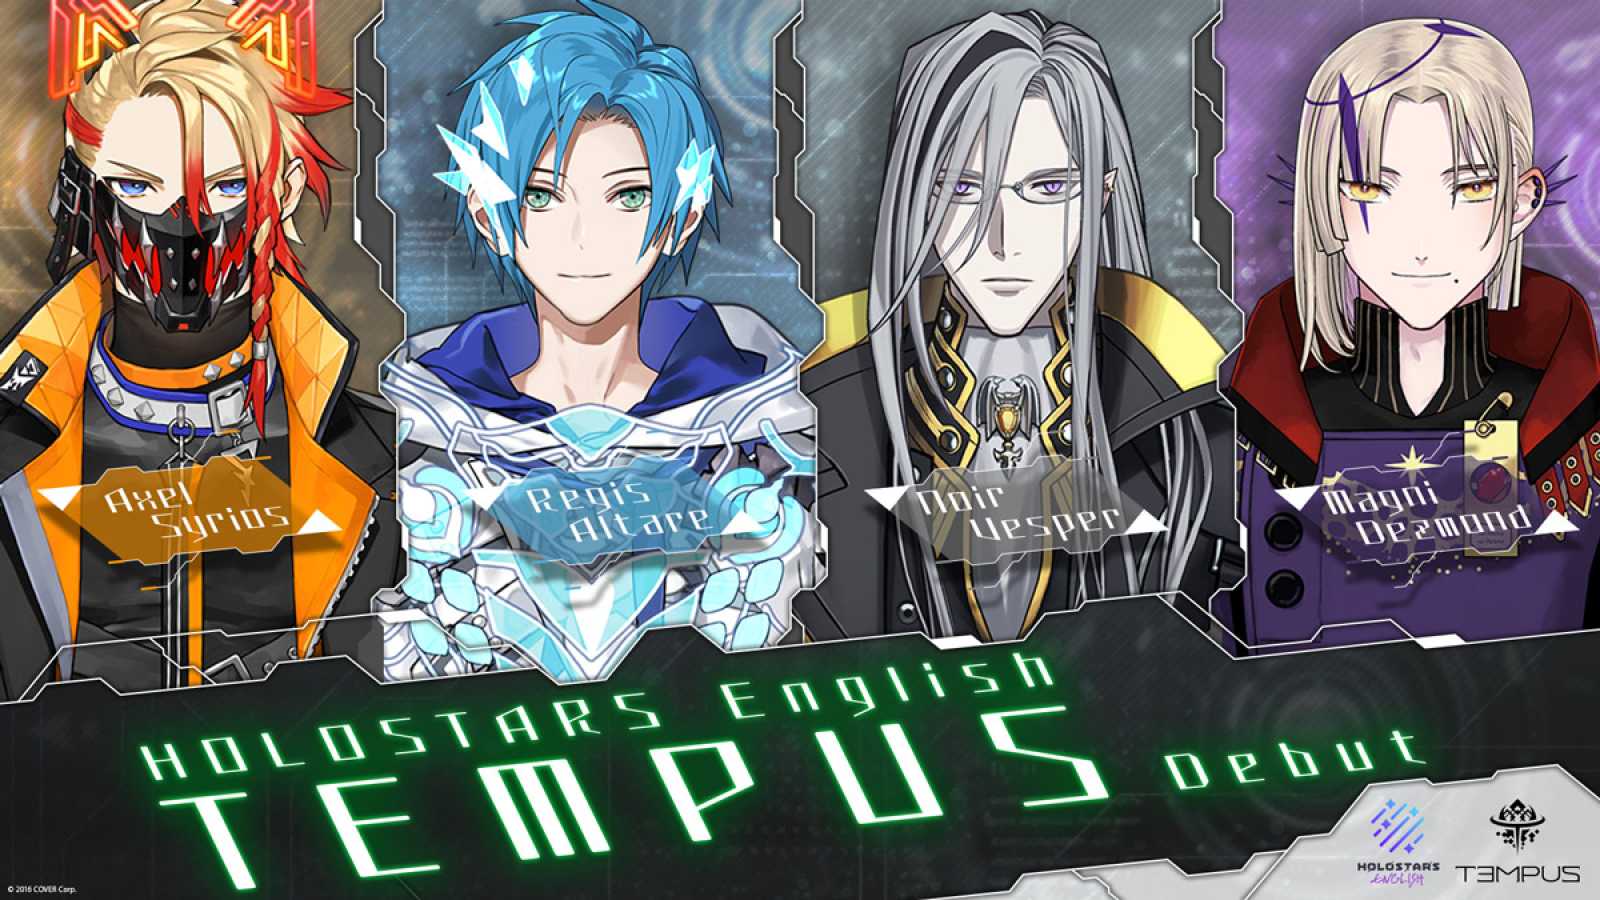 HOLOSTARS Debuts Male English-Speaking VTuber Unit TEMPUS © COVER Corp. All rights reserved.